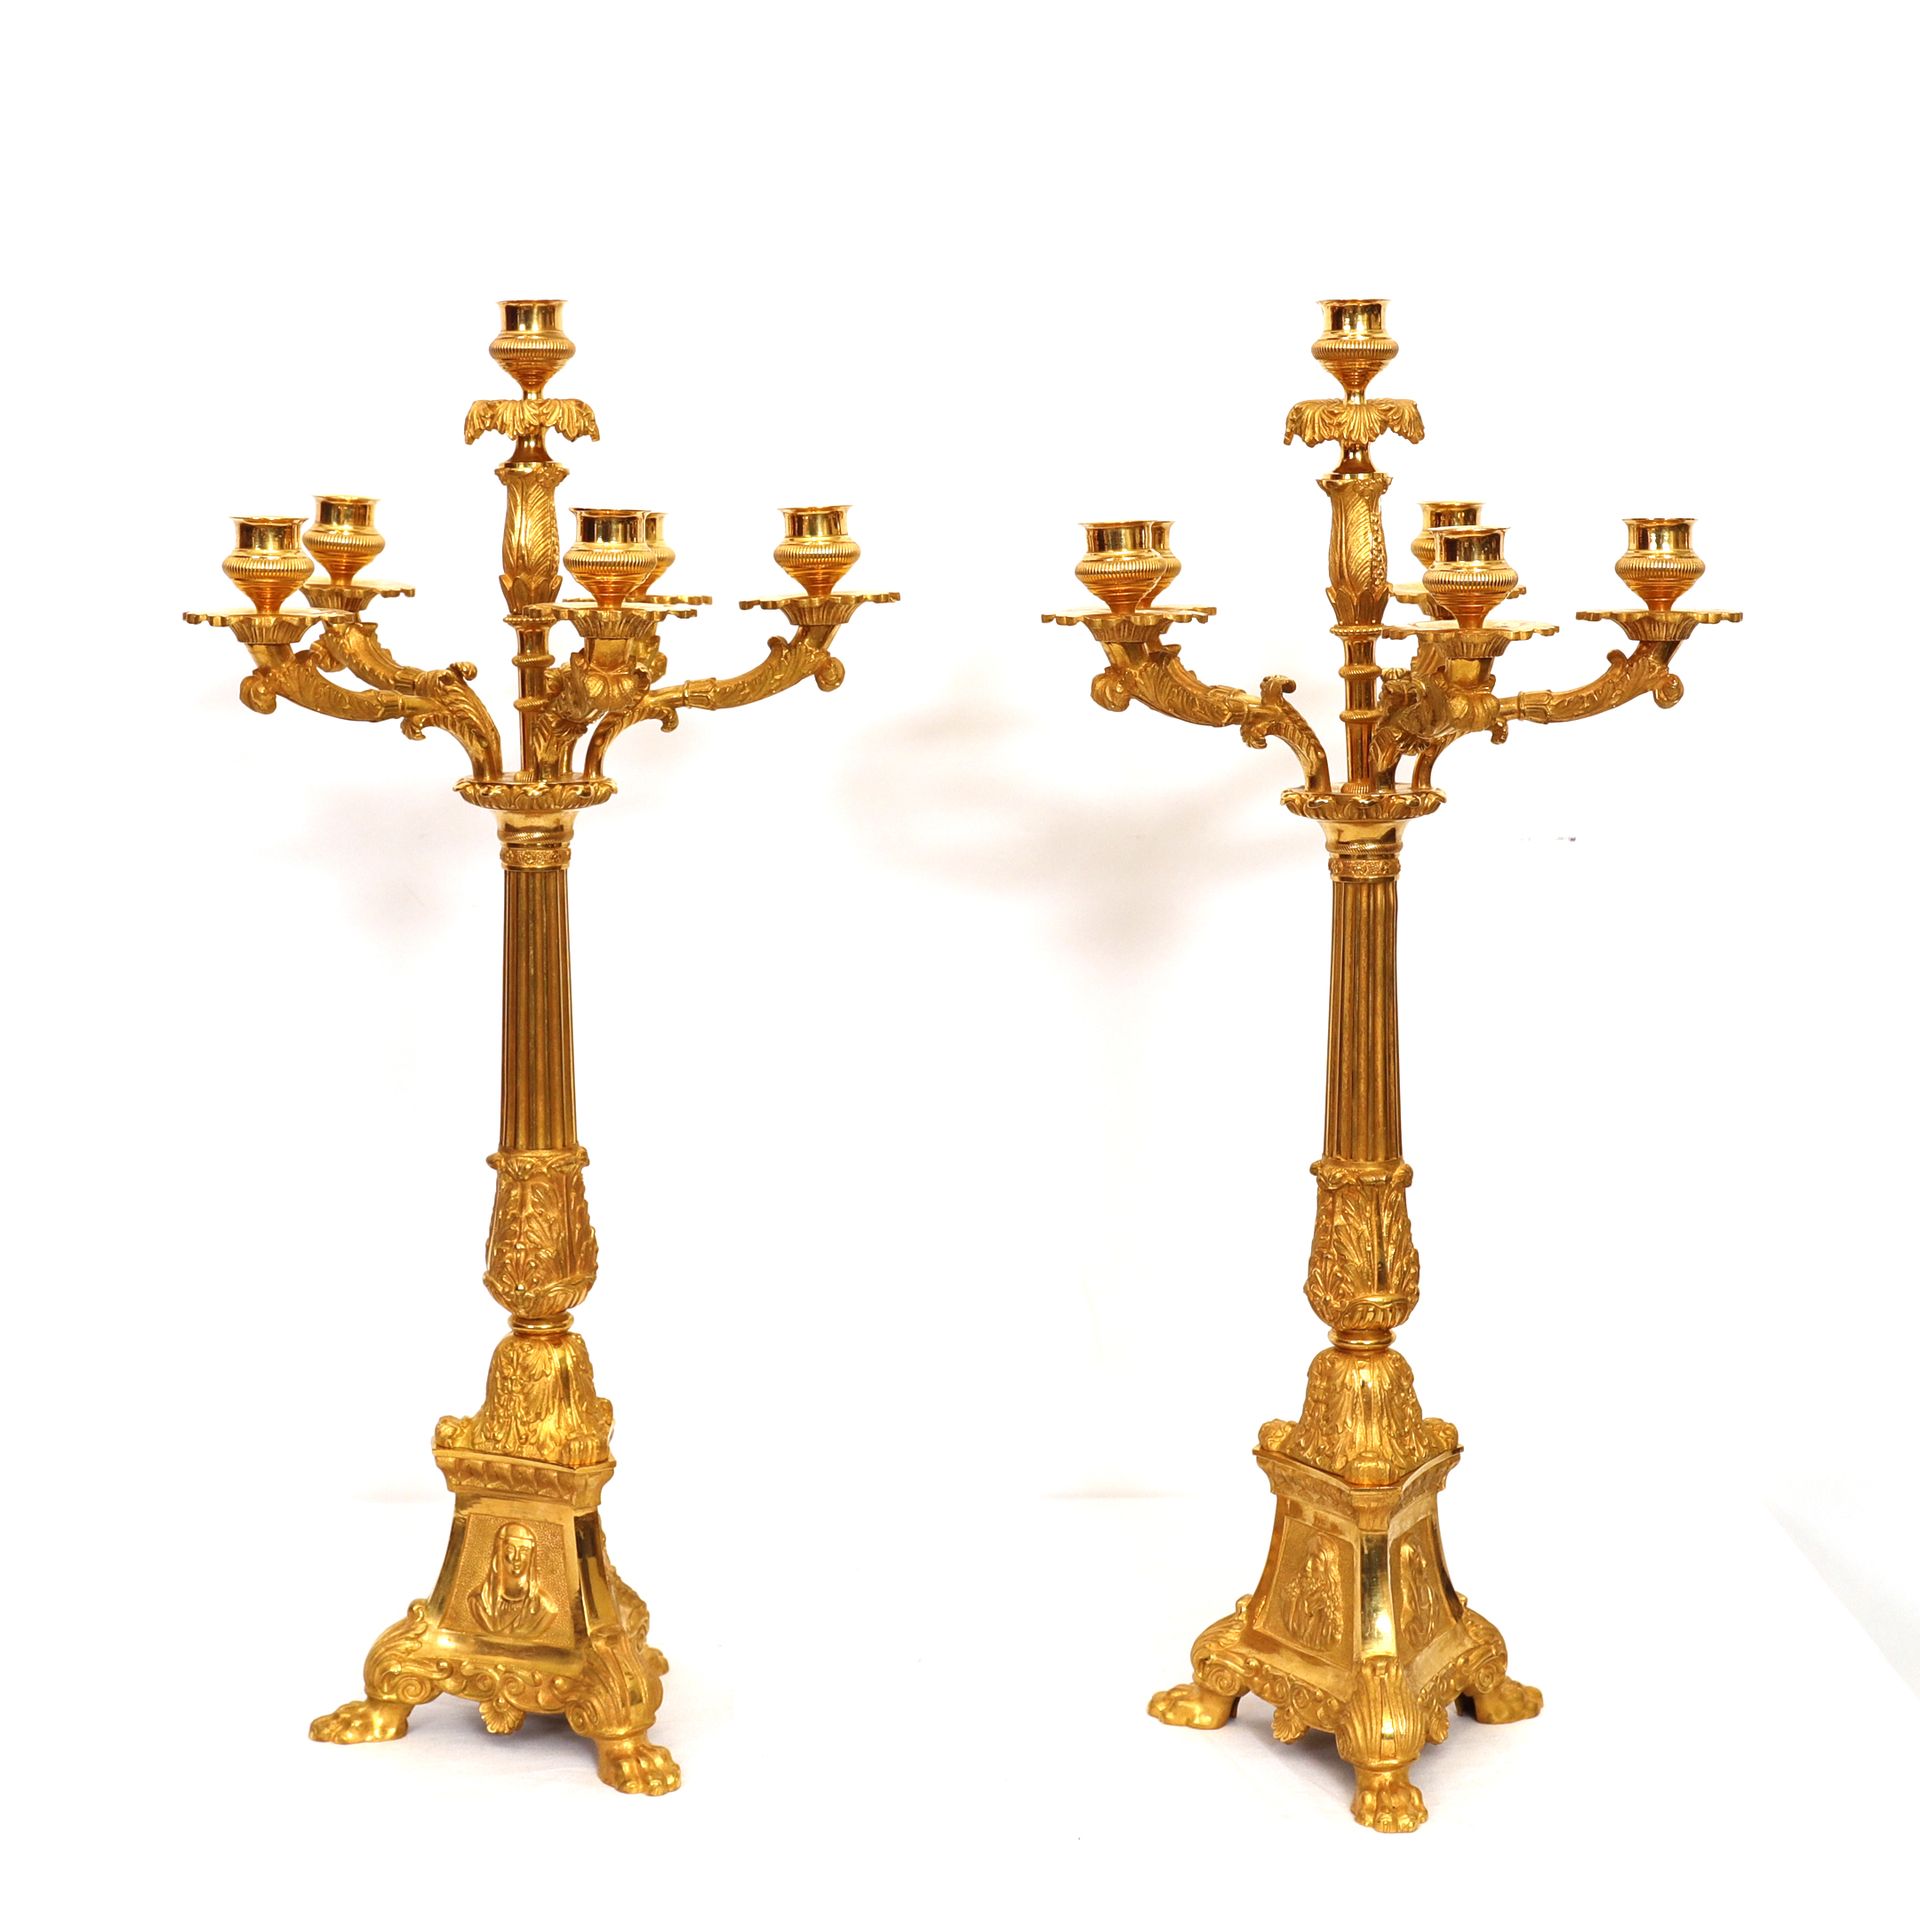 Null PAIR OF LARGE GILT BRONZE CANDELABRAS

Chased and gilded bronze with 6 arms&hellip;